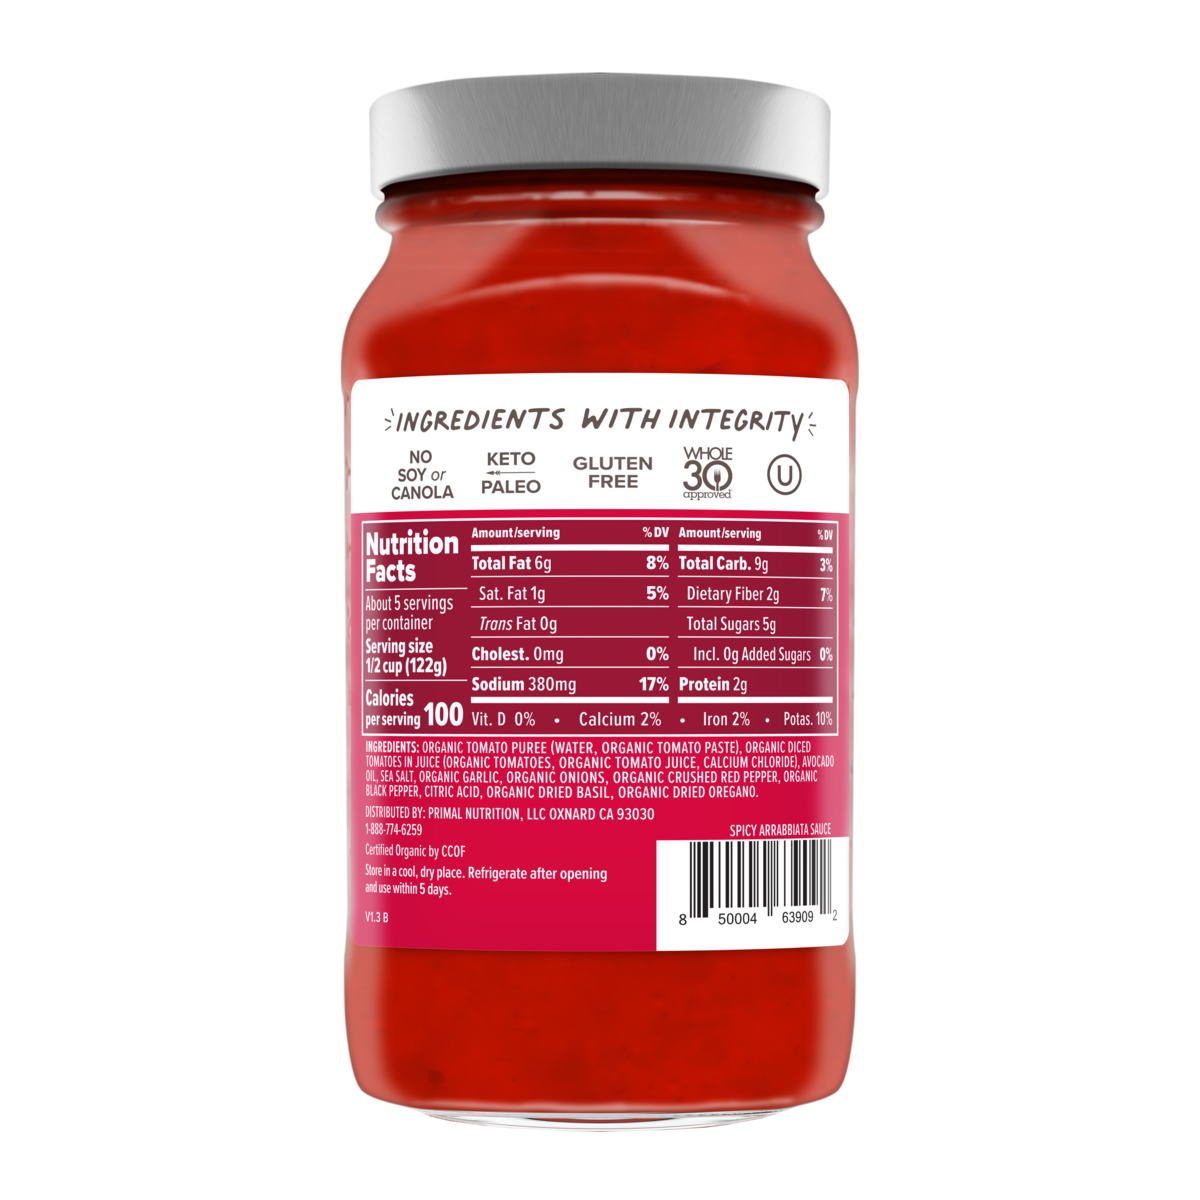 Back side of a jar of Primal Kitchen Arrabbiata Marinara spicy tomato sauce, with a label including nutrition facts and ingredient list. 